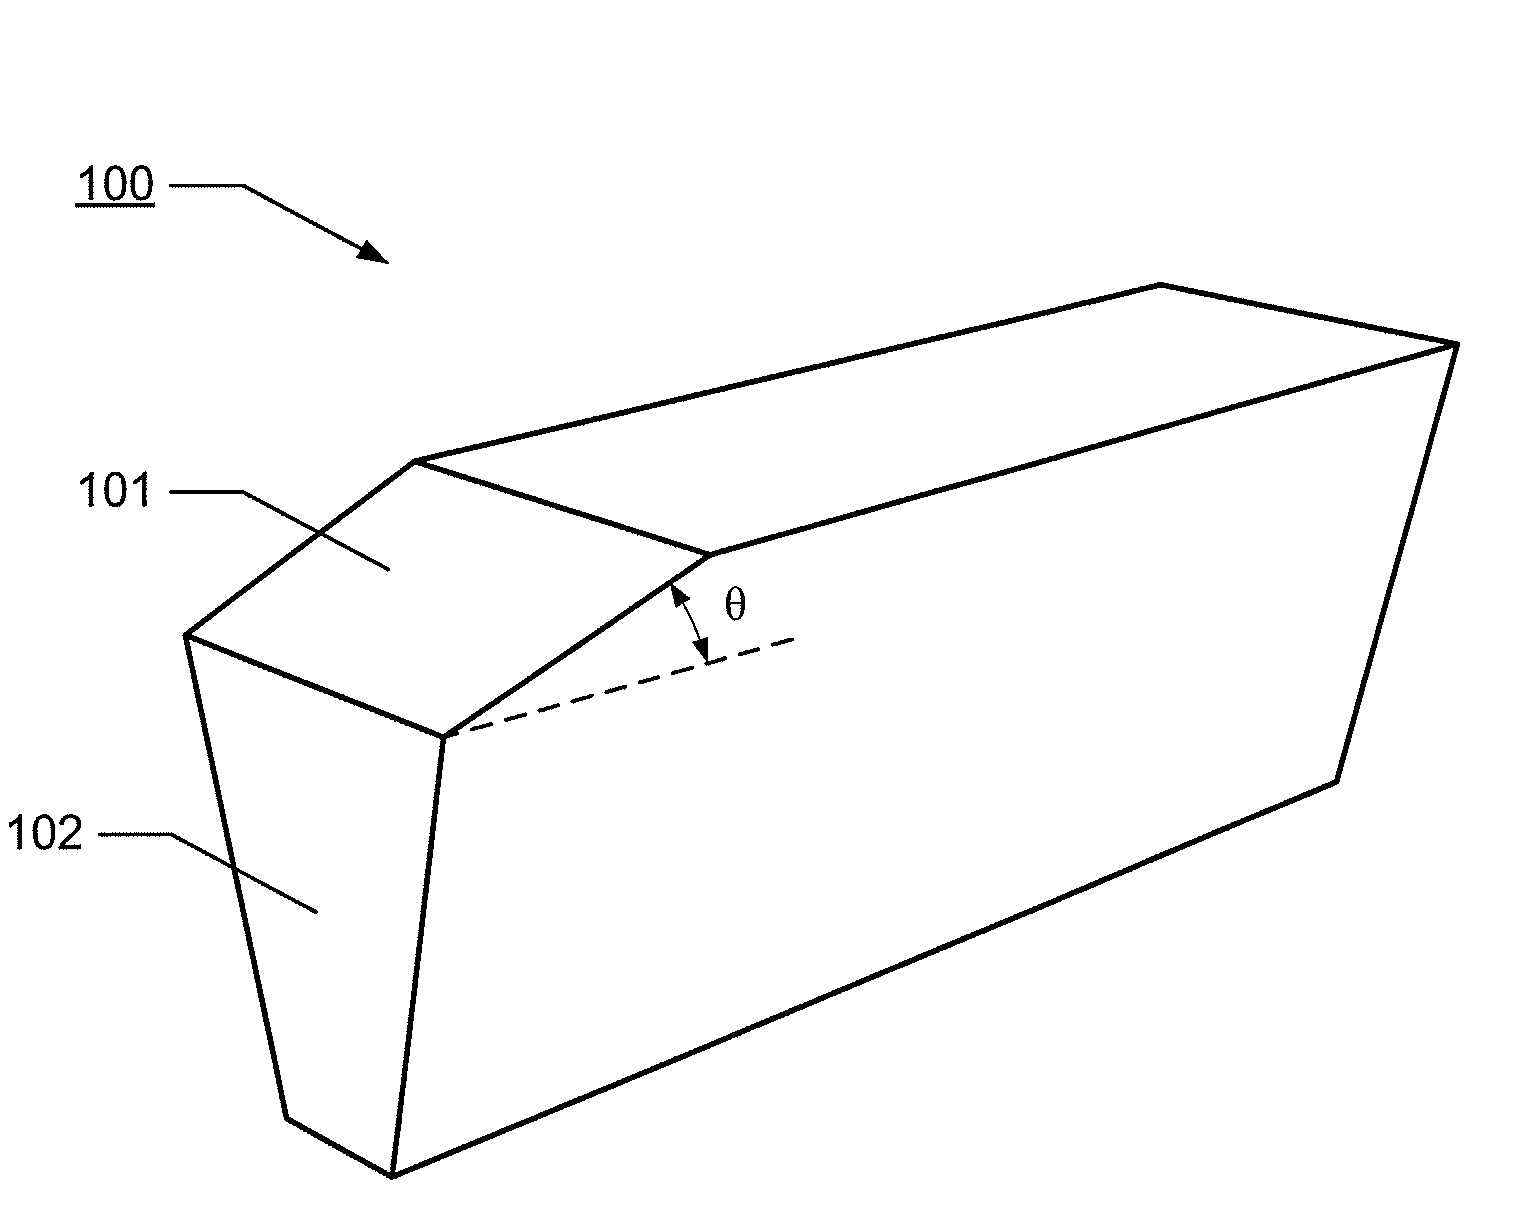 Method of measuring a bevel angle in a write head